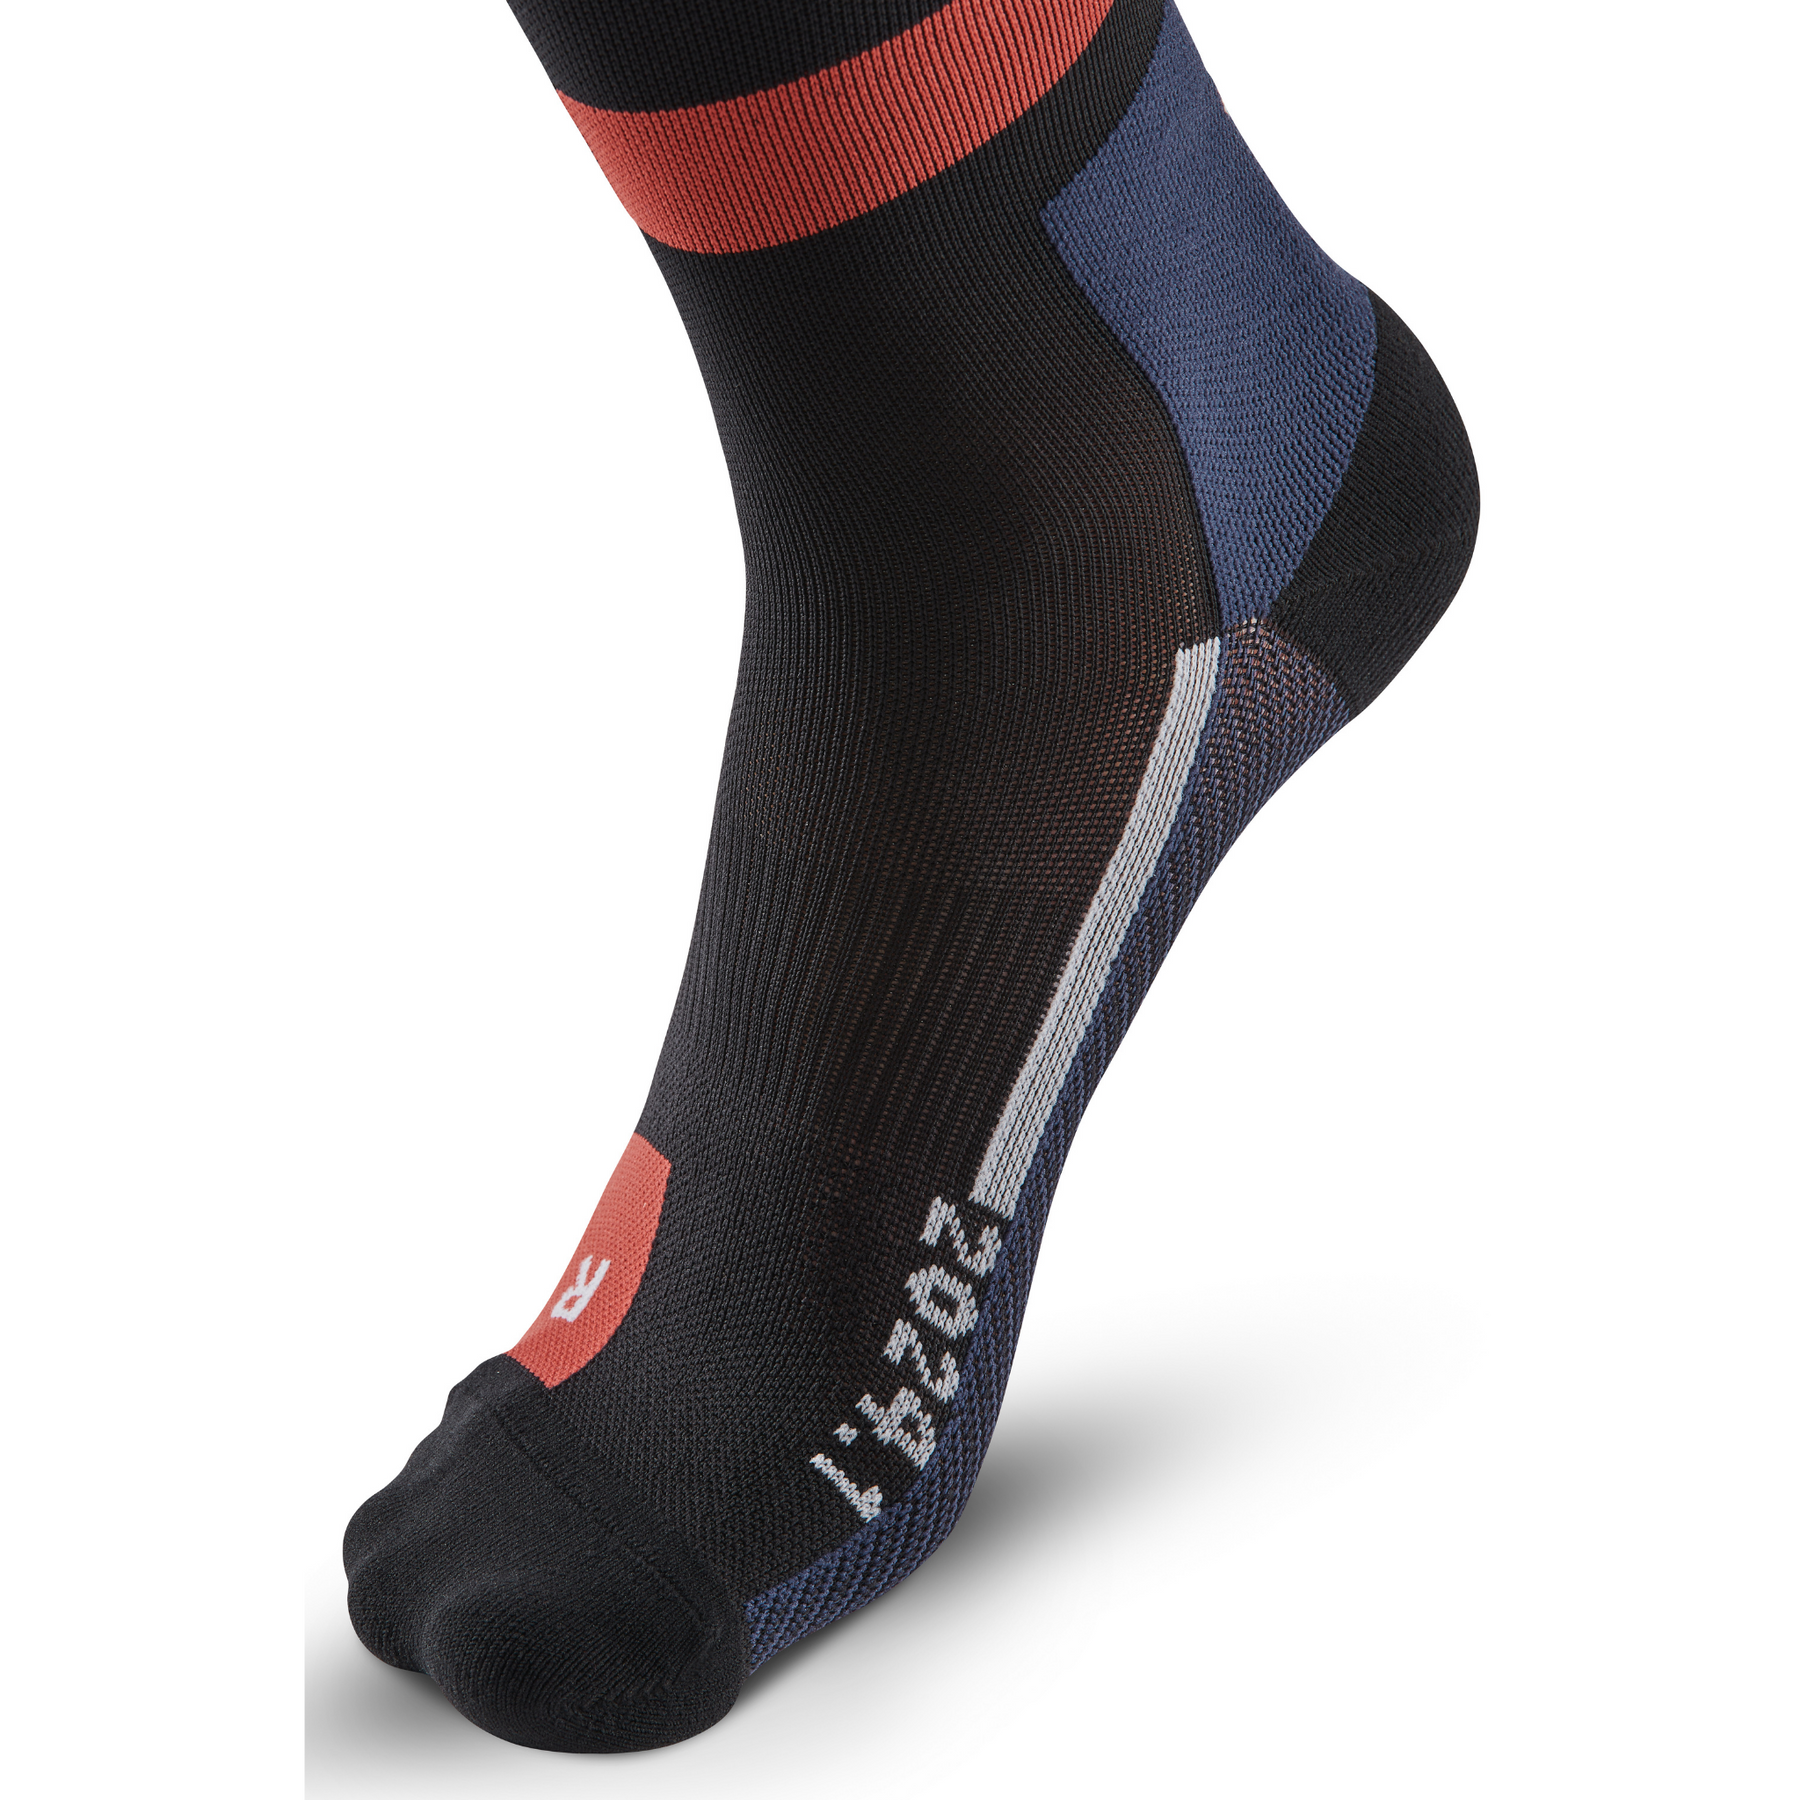 The Run Limited Tall Compression Socks for Men